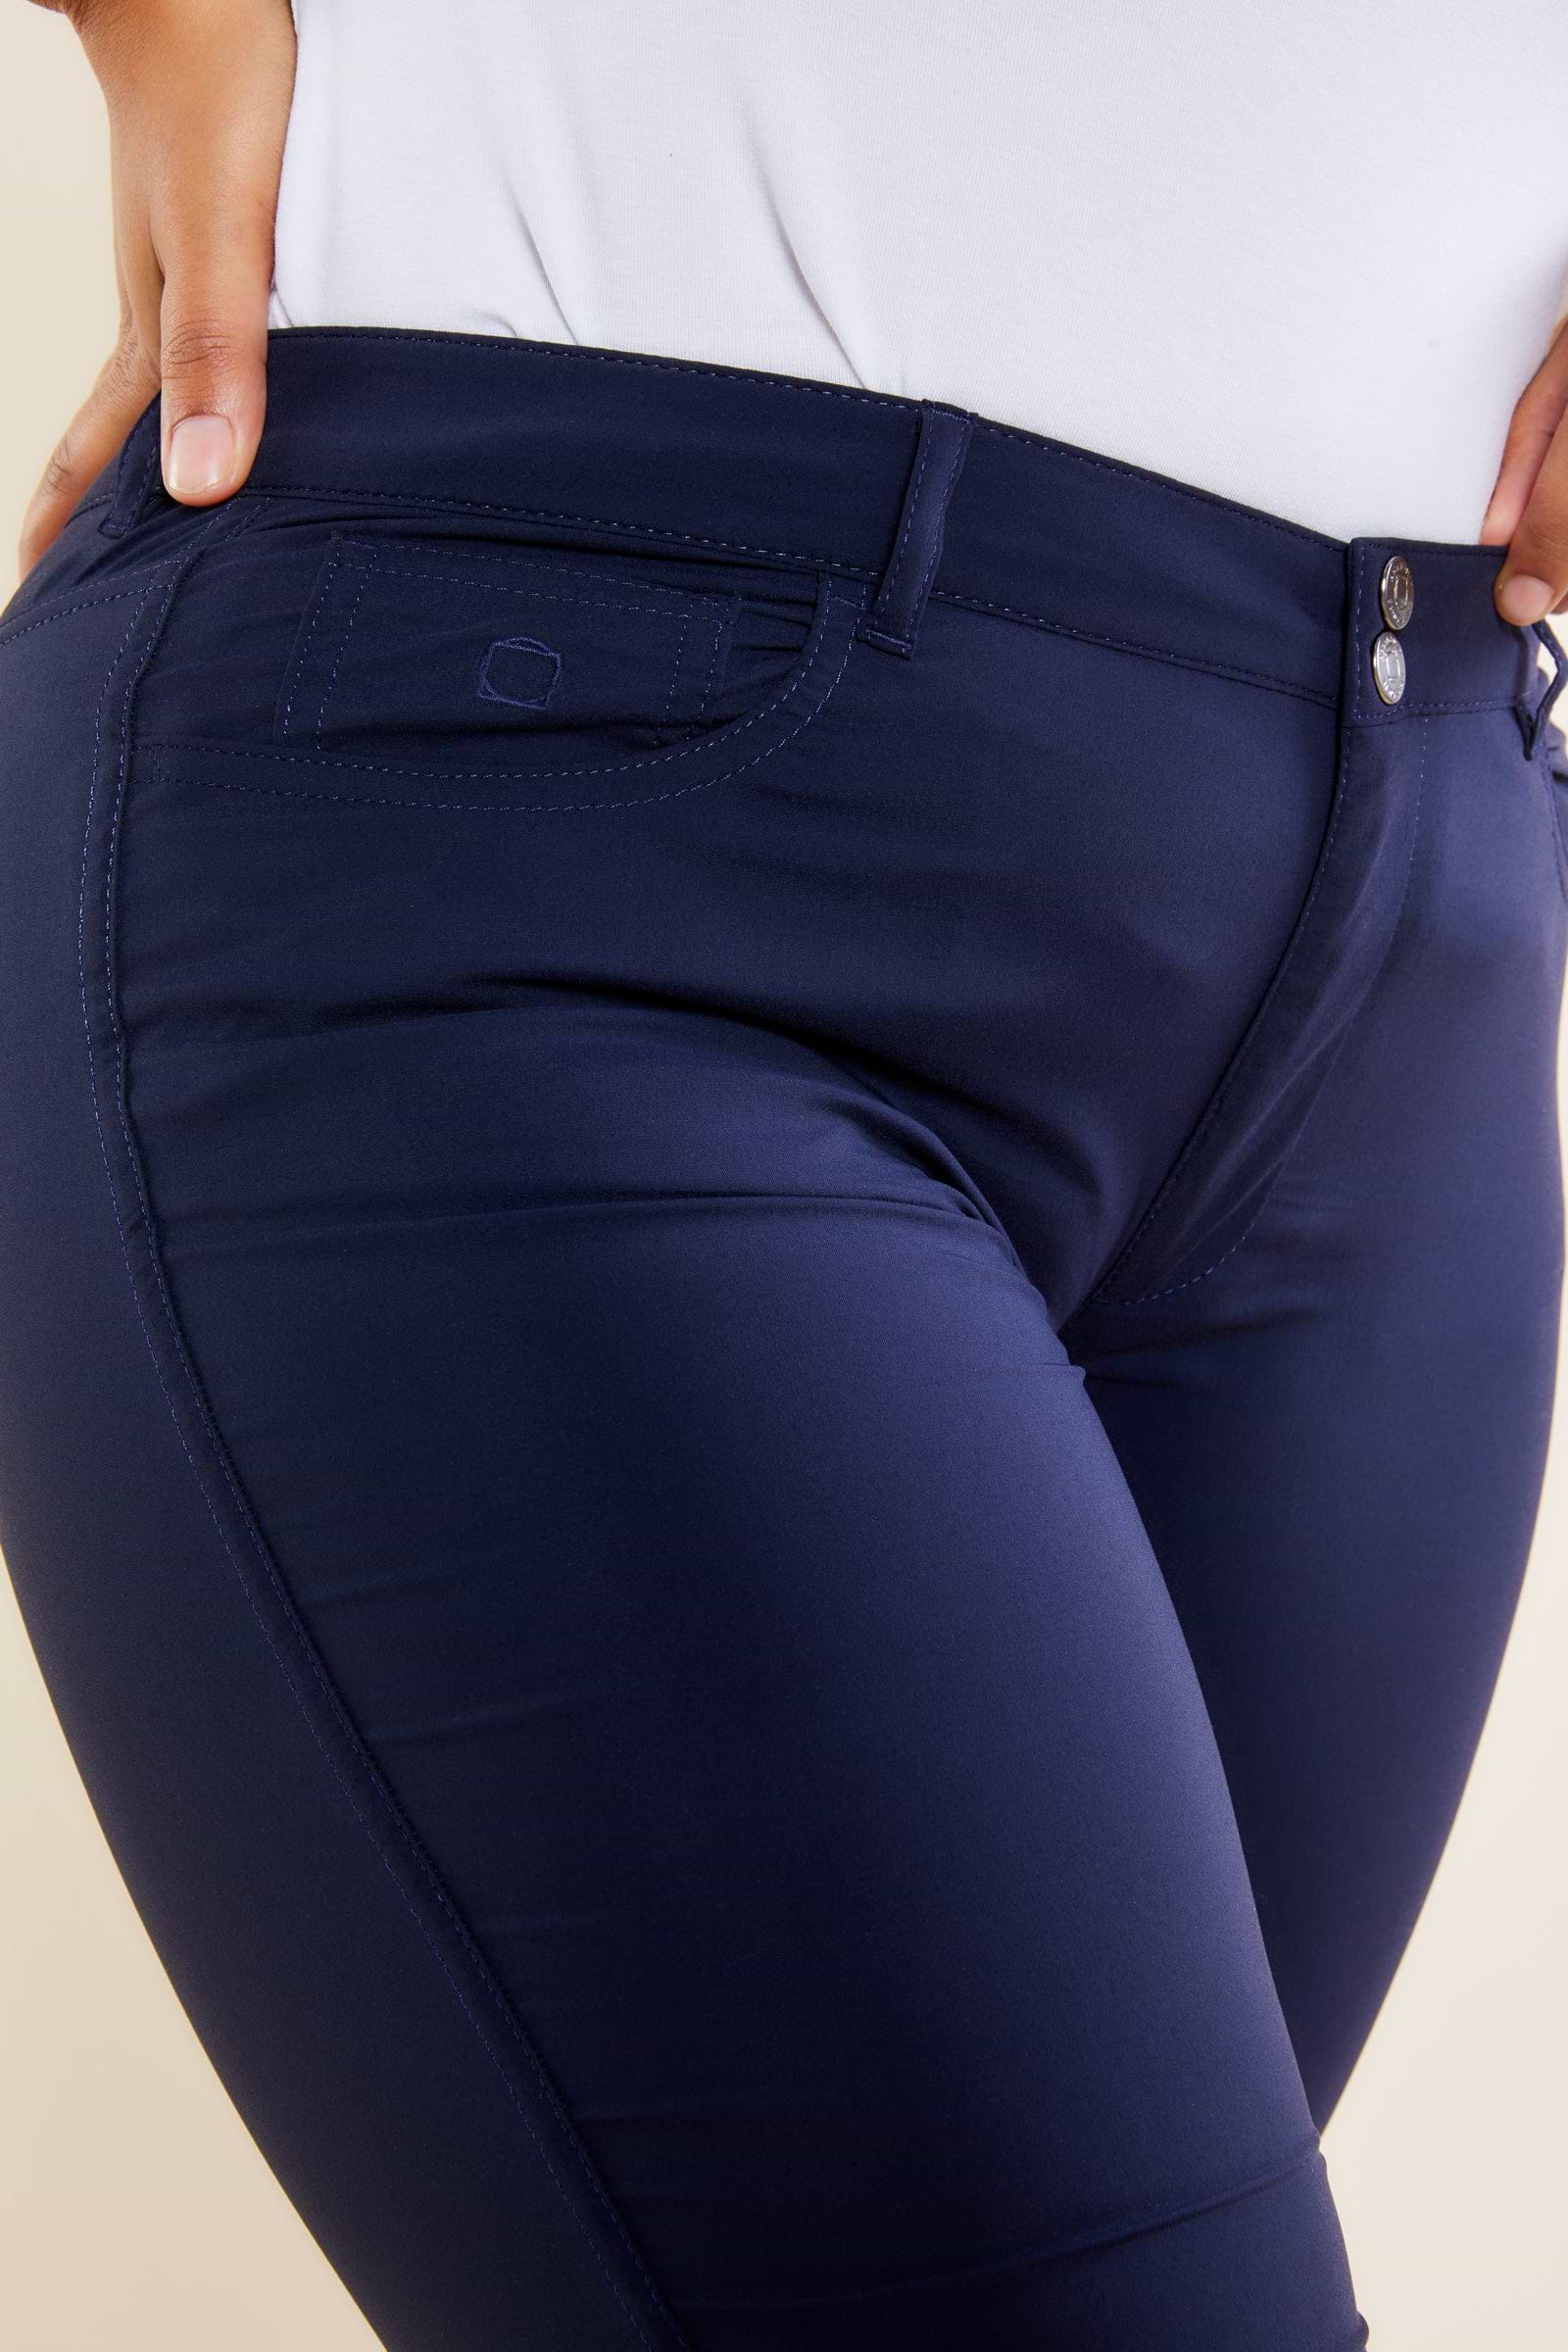 The Best Travel Pants. Front Pocket of the Luisa Skinny Jean Pant in Navy